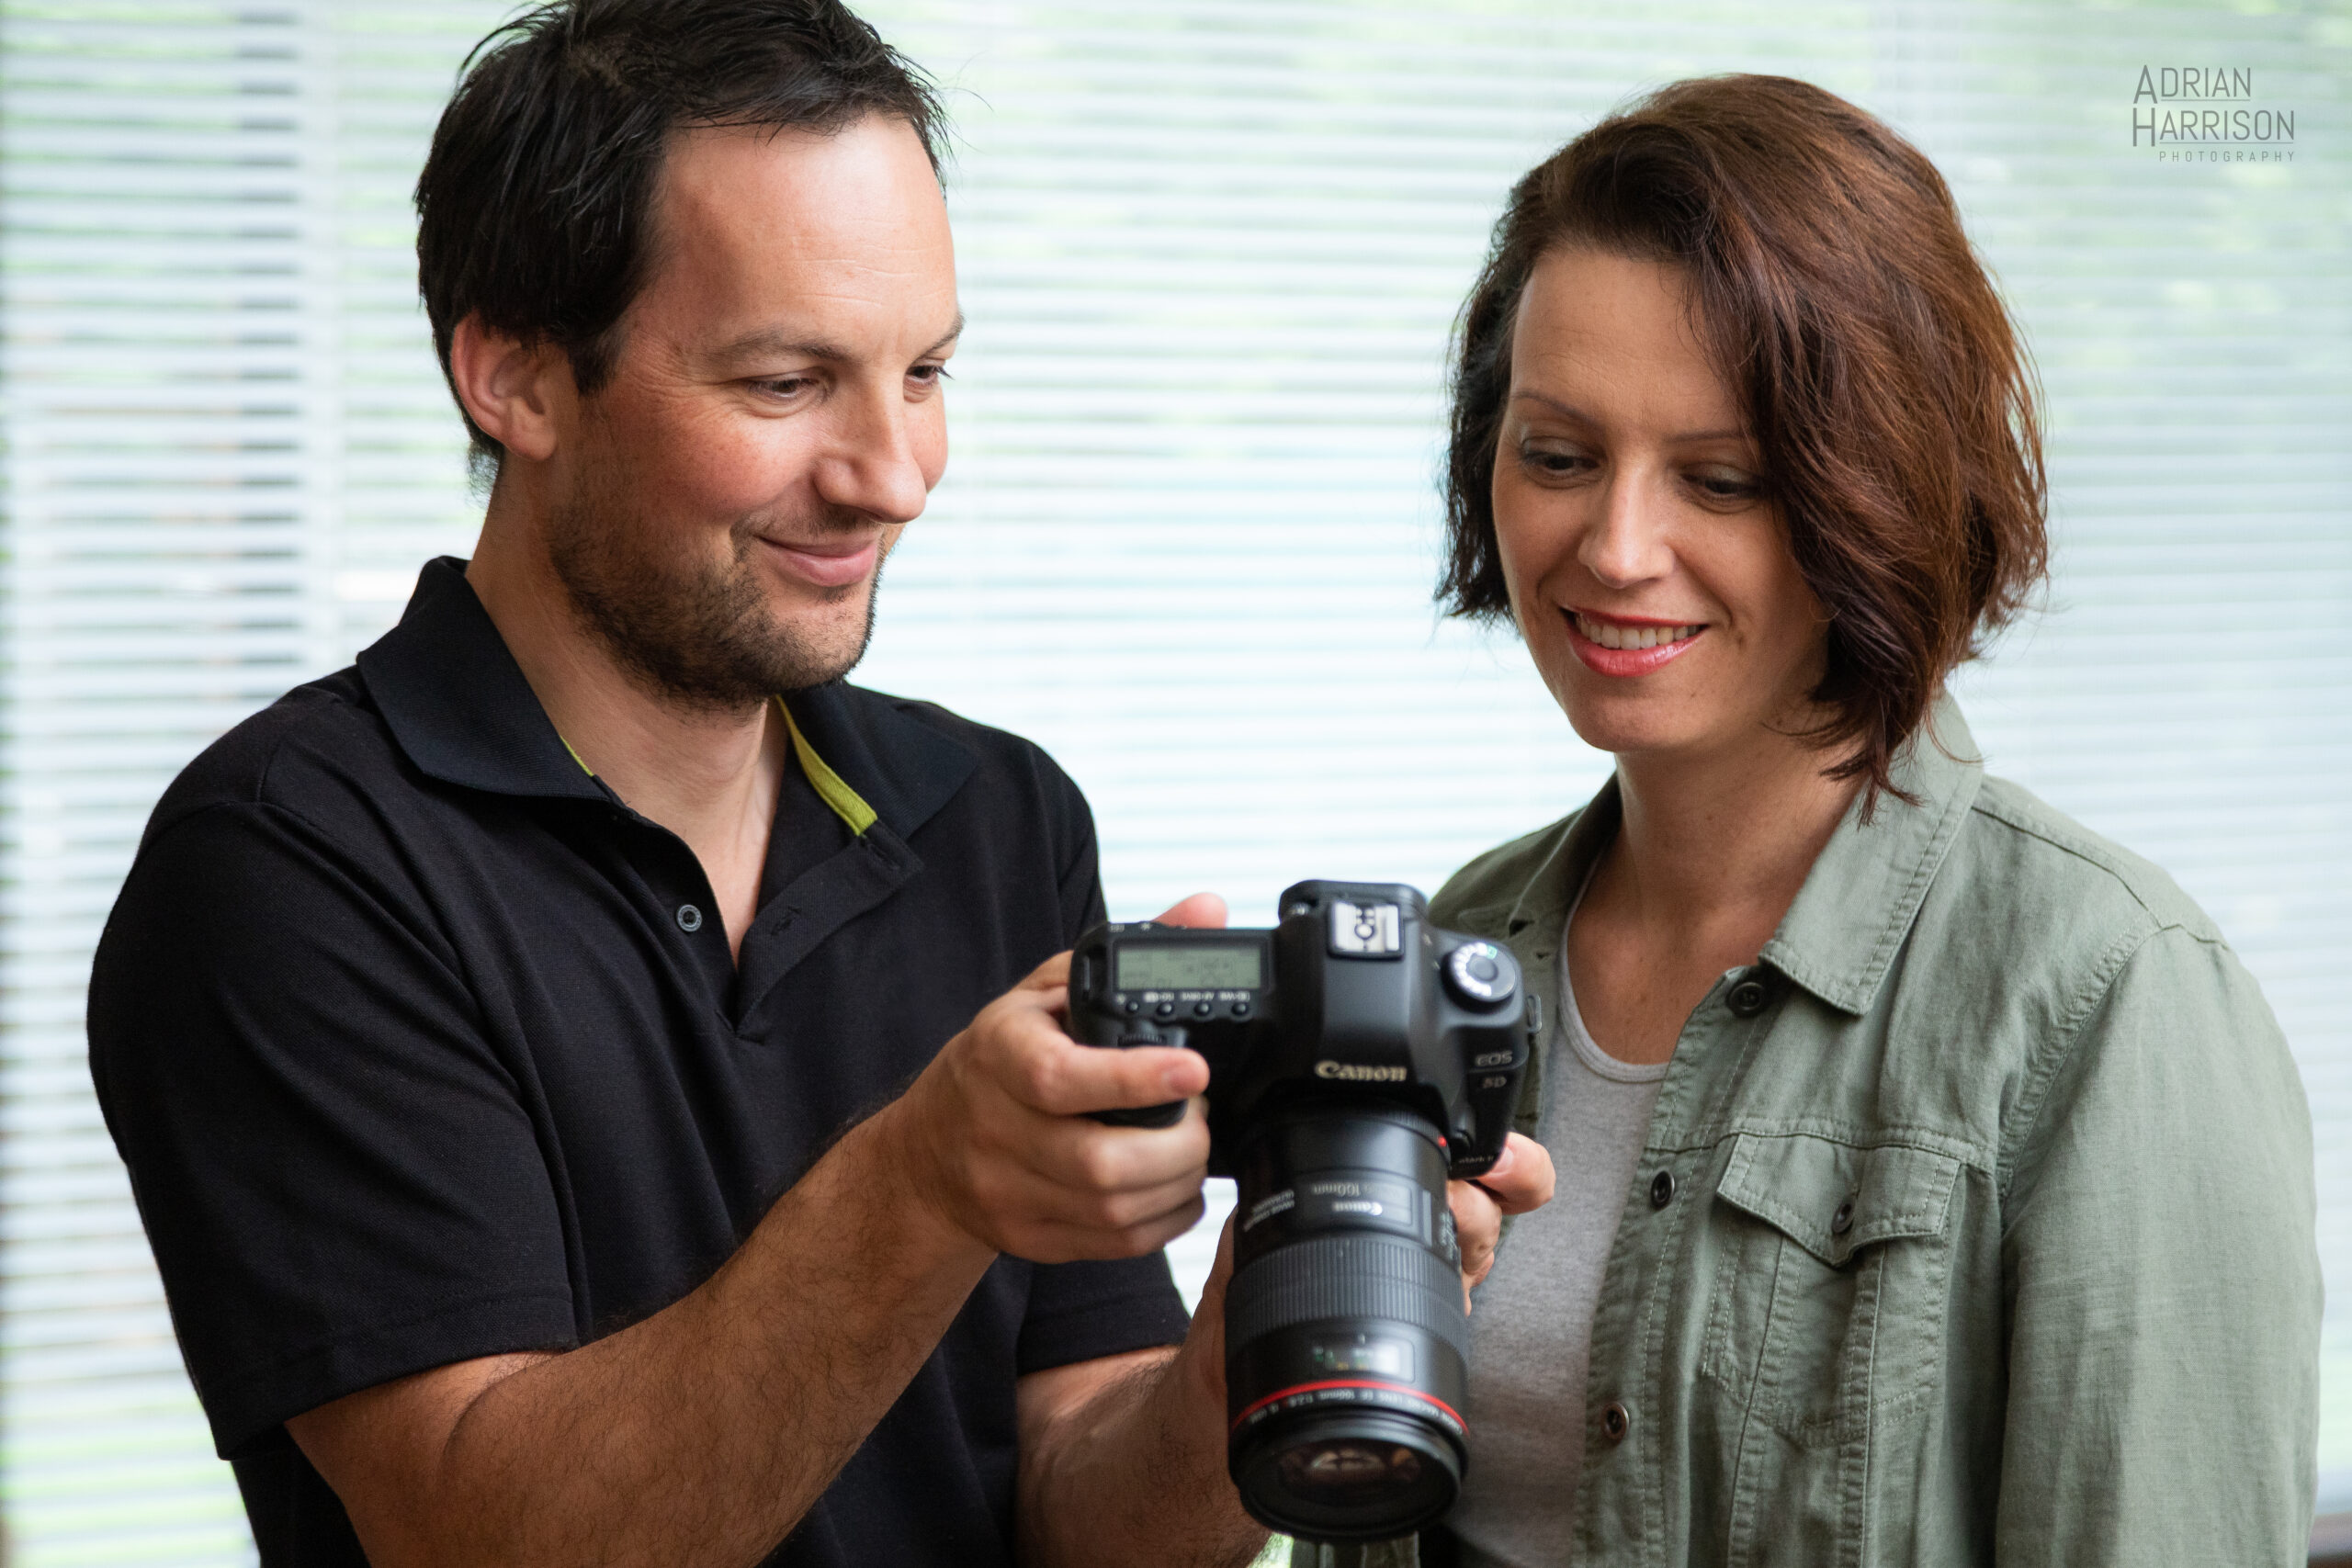 Corporate photography expert Adrian Harrison with Sydney based client showing photos of a photoshoot on a camera.